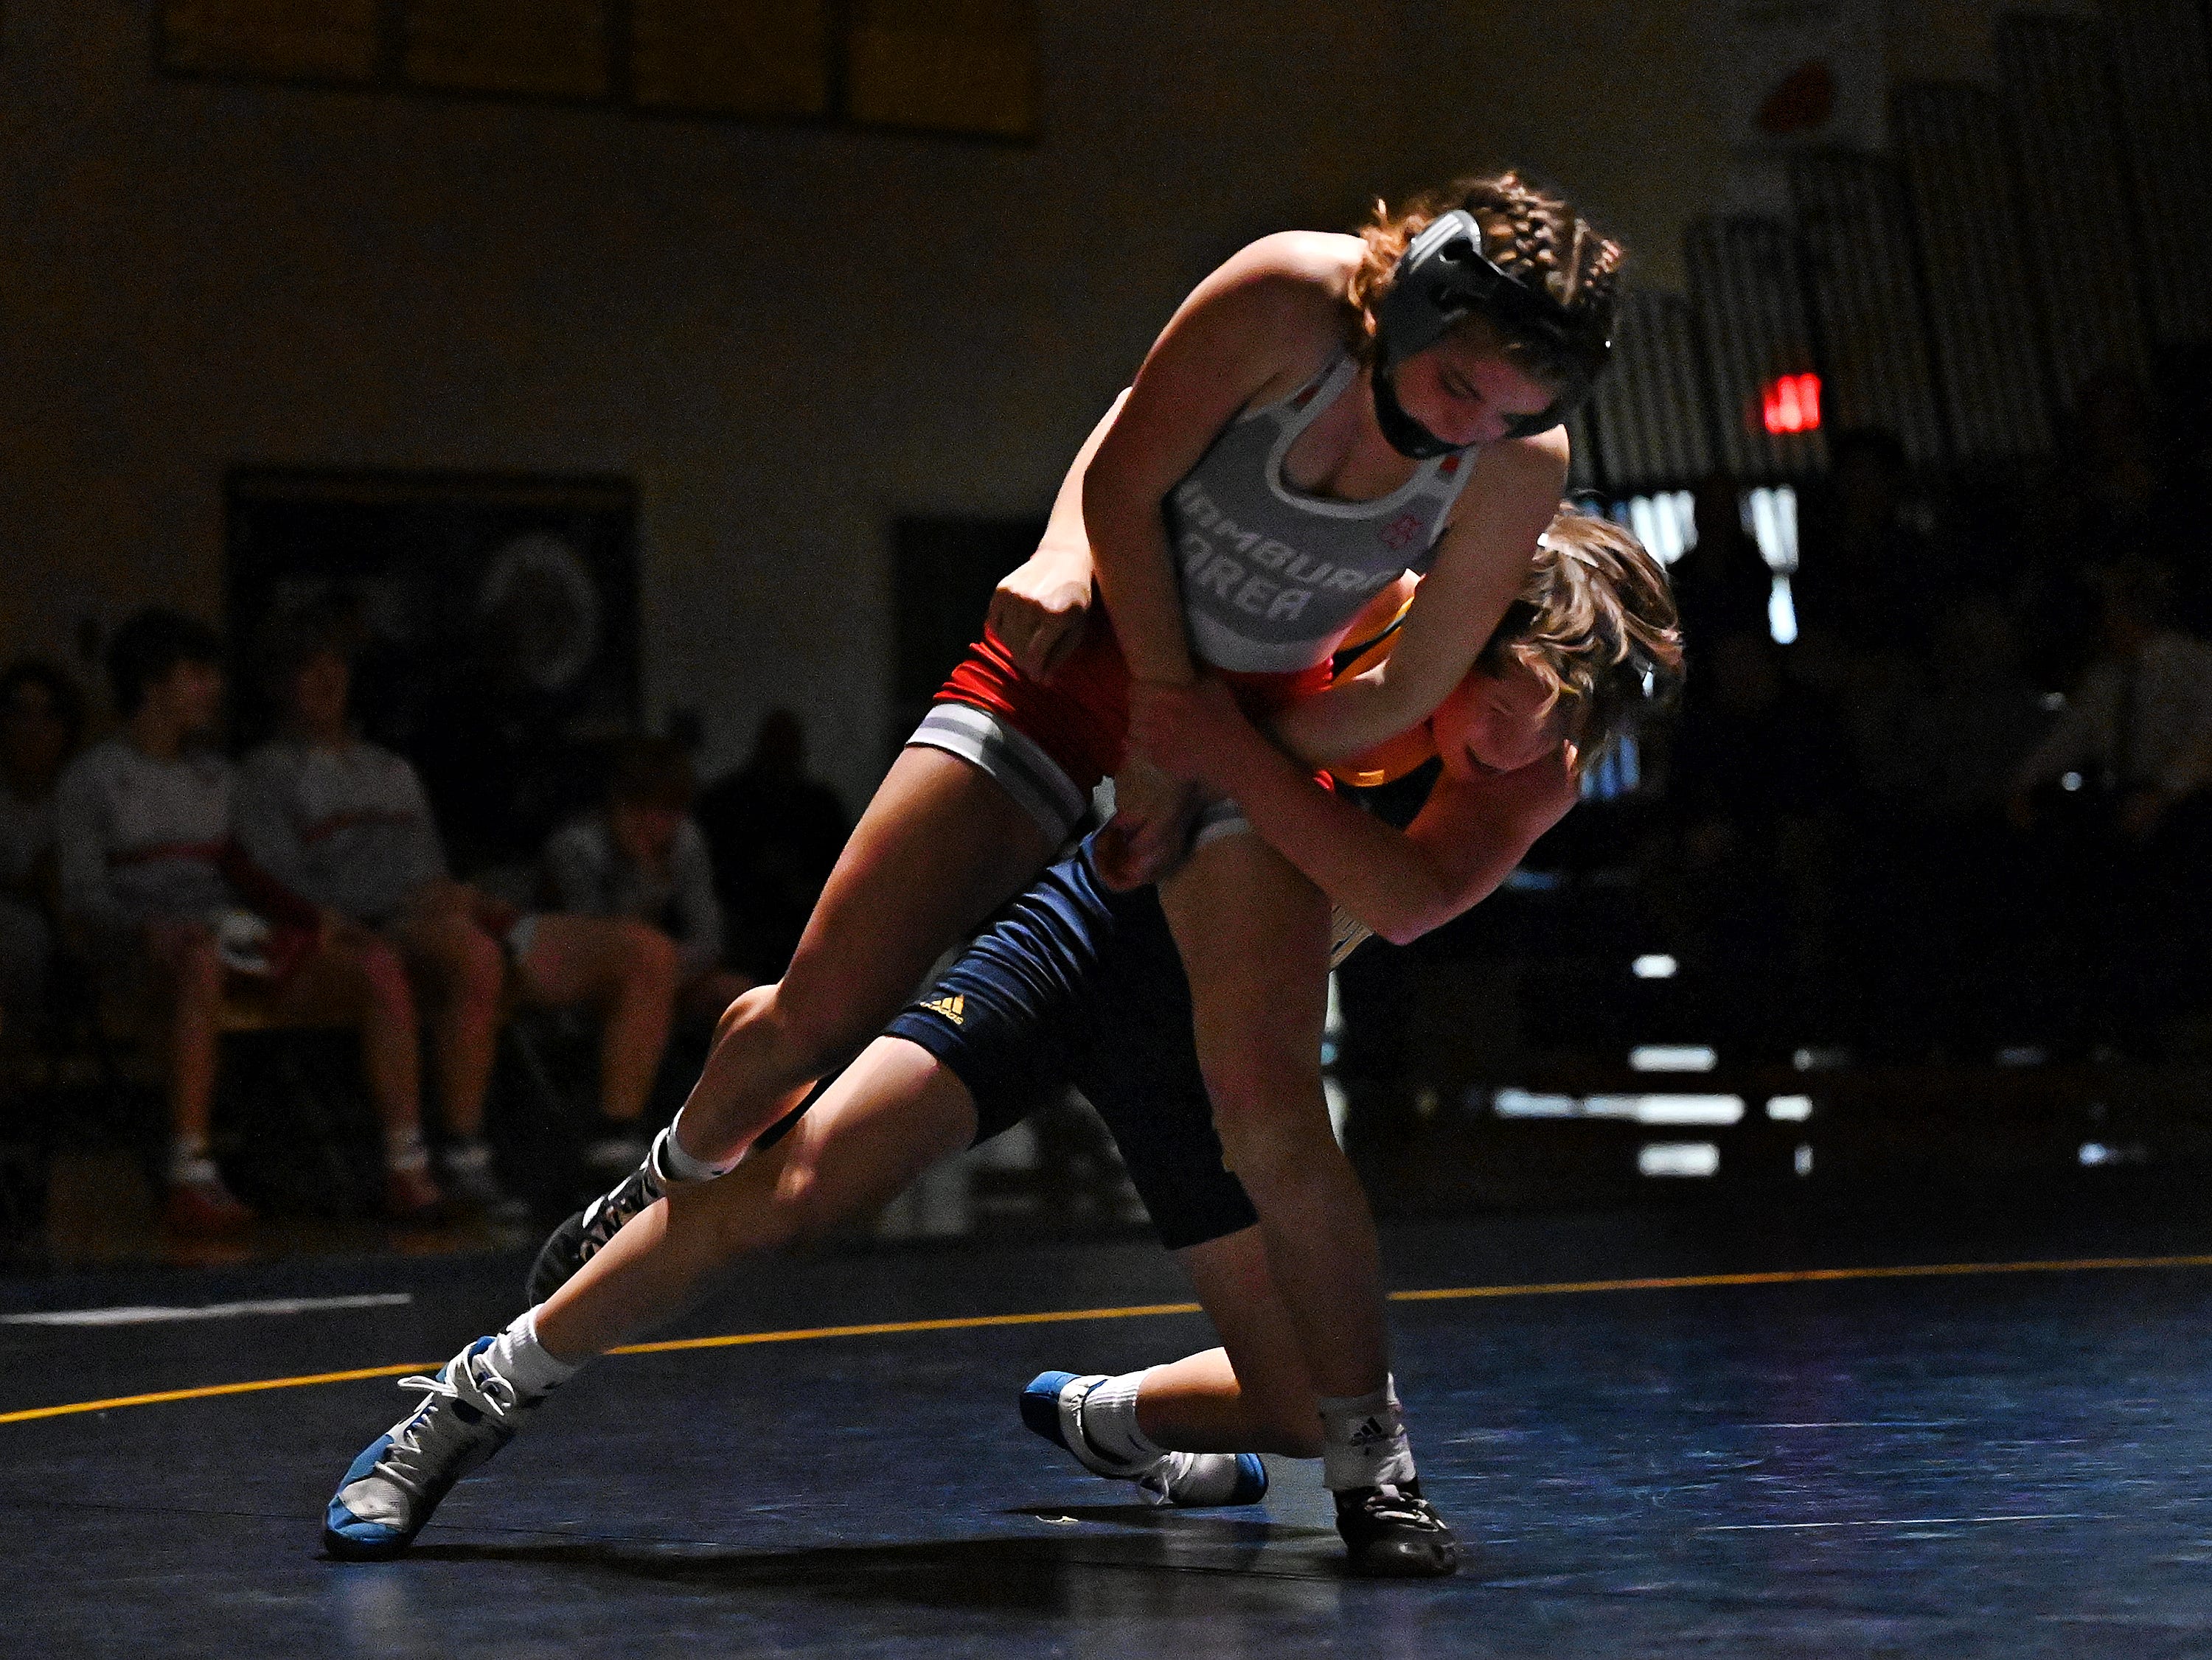 Eastern York’s Brock Adams, back, and Hamburg’s Isabelle Wilkes compete in the 107-pound weight class during PIAA District 3, Class 2-A first round wrestling action at Eastern York High School in Lower Windsor Township, Monday, Jan. 30, 2023. Adams would win the match and Eastern York would win the meet 50-22. Dawn J. Sagert photo